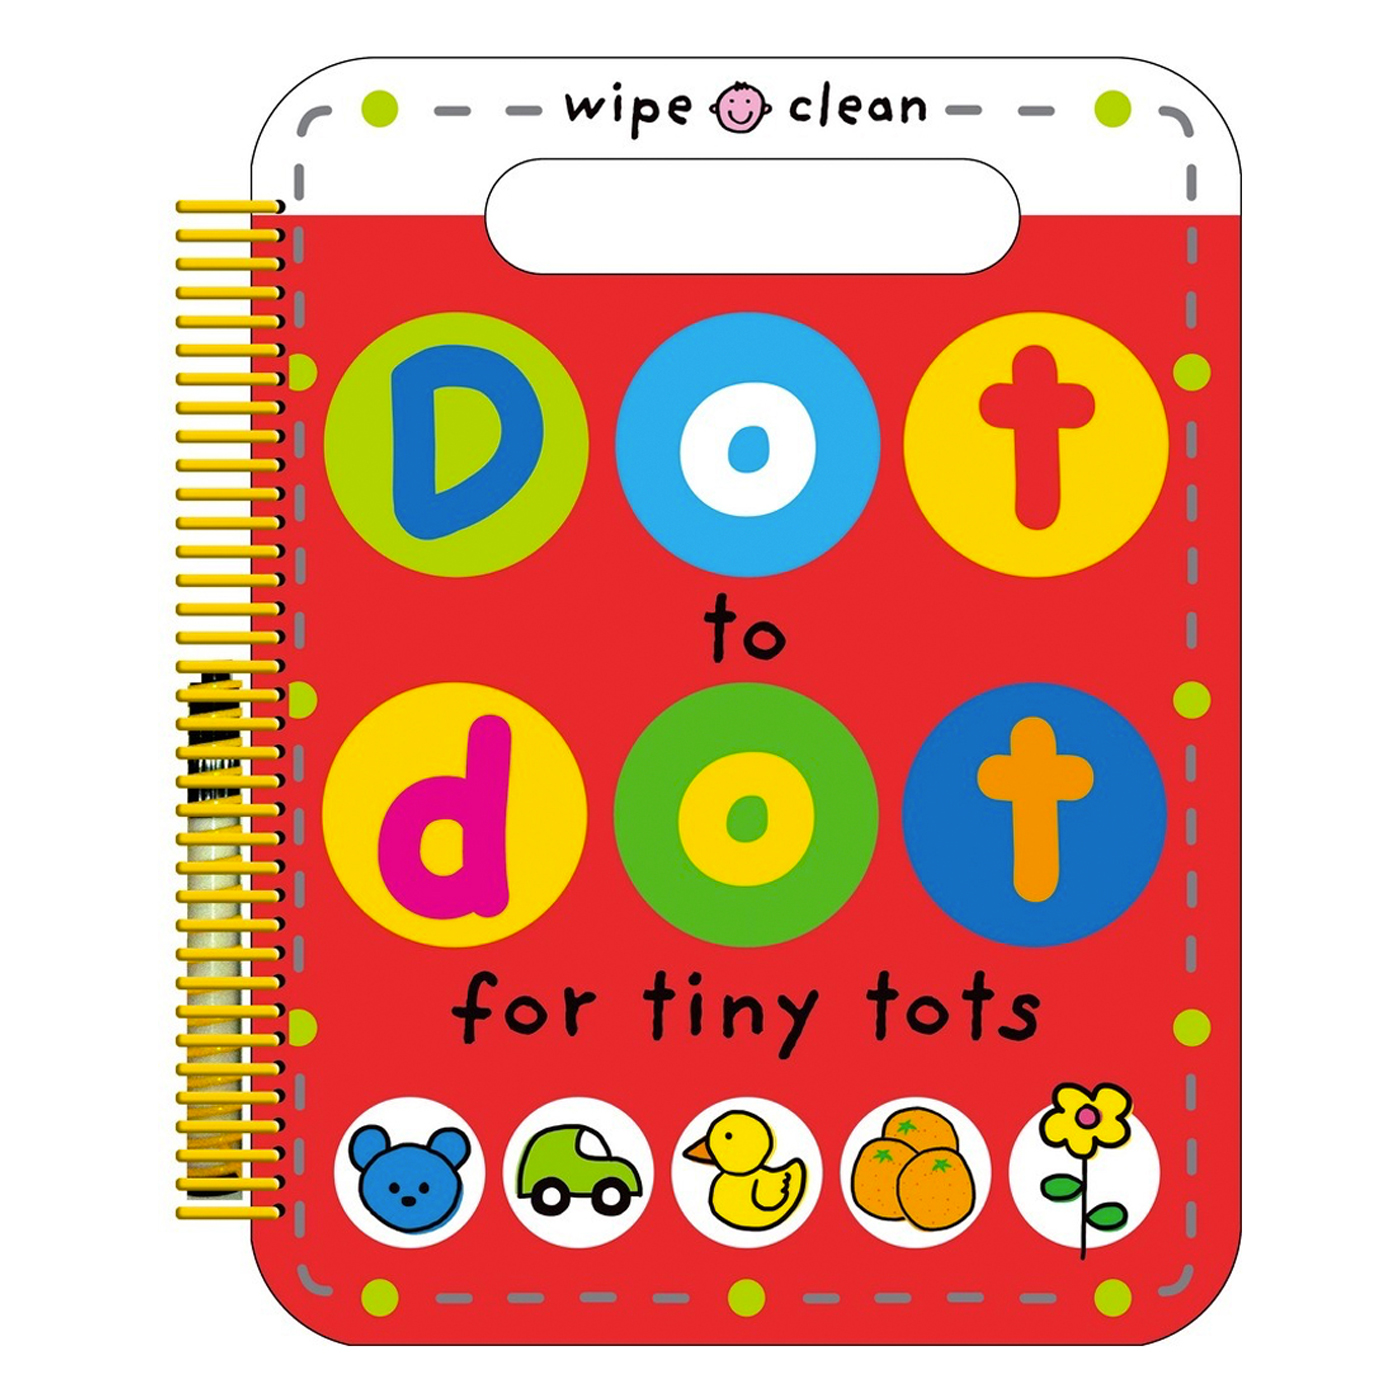  Dot to Dot for Tiny Tots